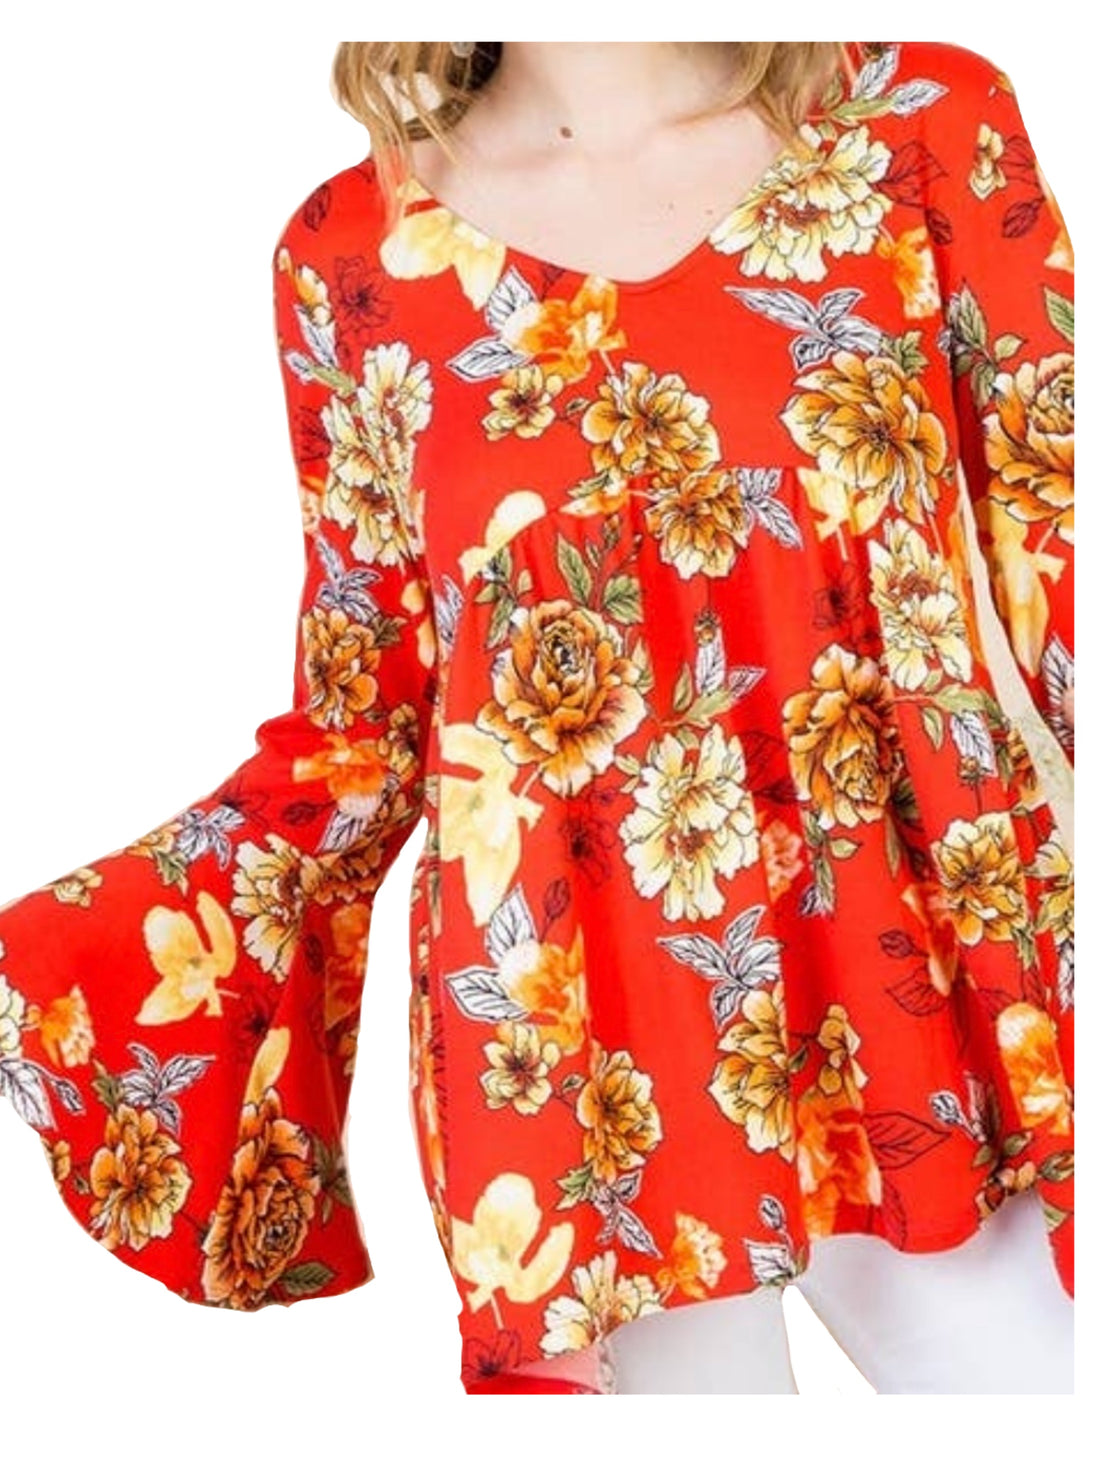 Red-Orange Floral Baby Doll Top w/ Bell Sleeves